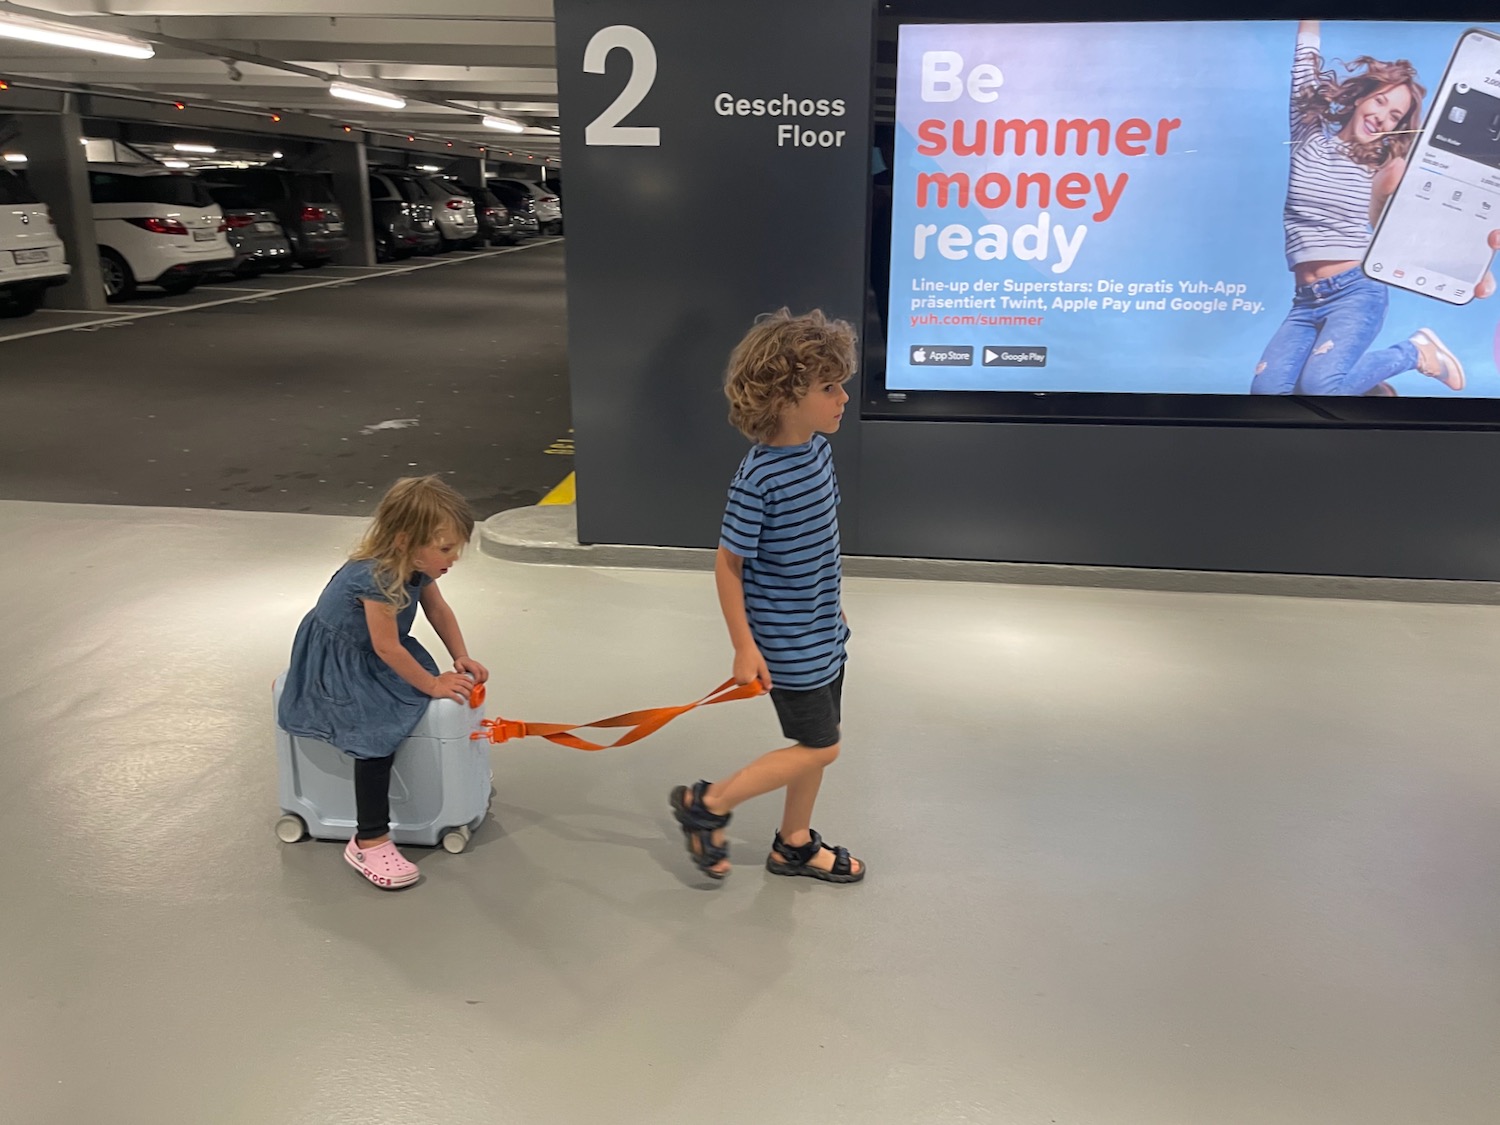 a boy and girl pulling luggage in a parking lot